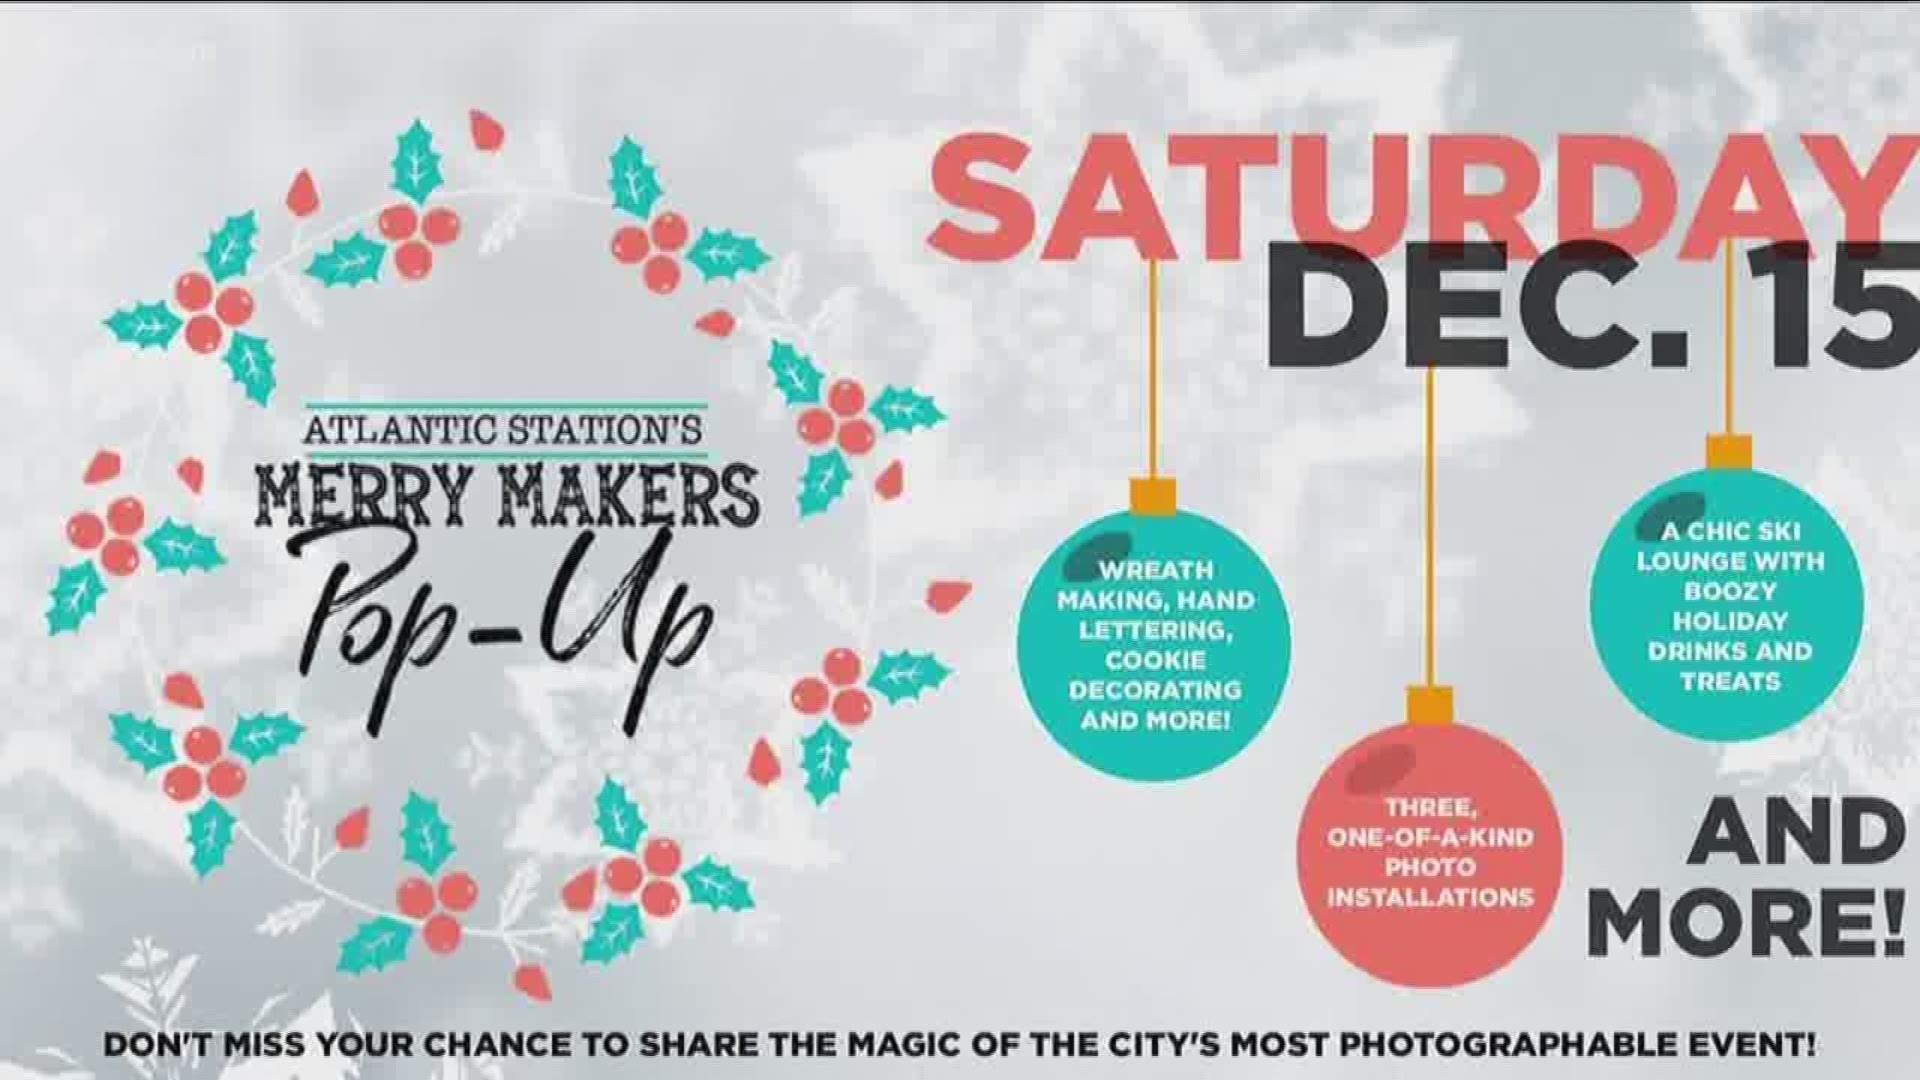 Merry Makers pop-up shop premieres at Atlantic Station